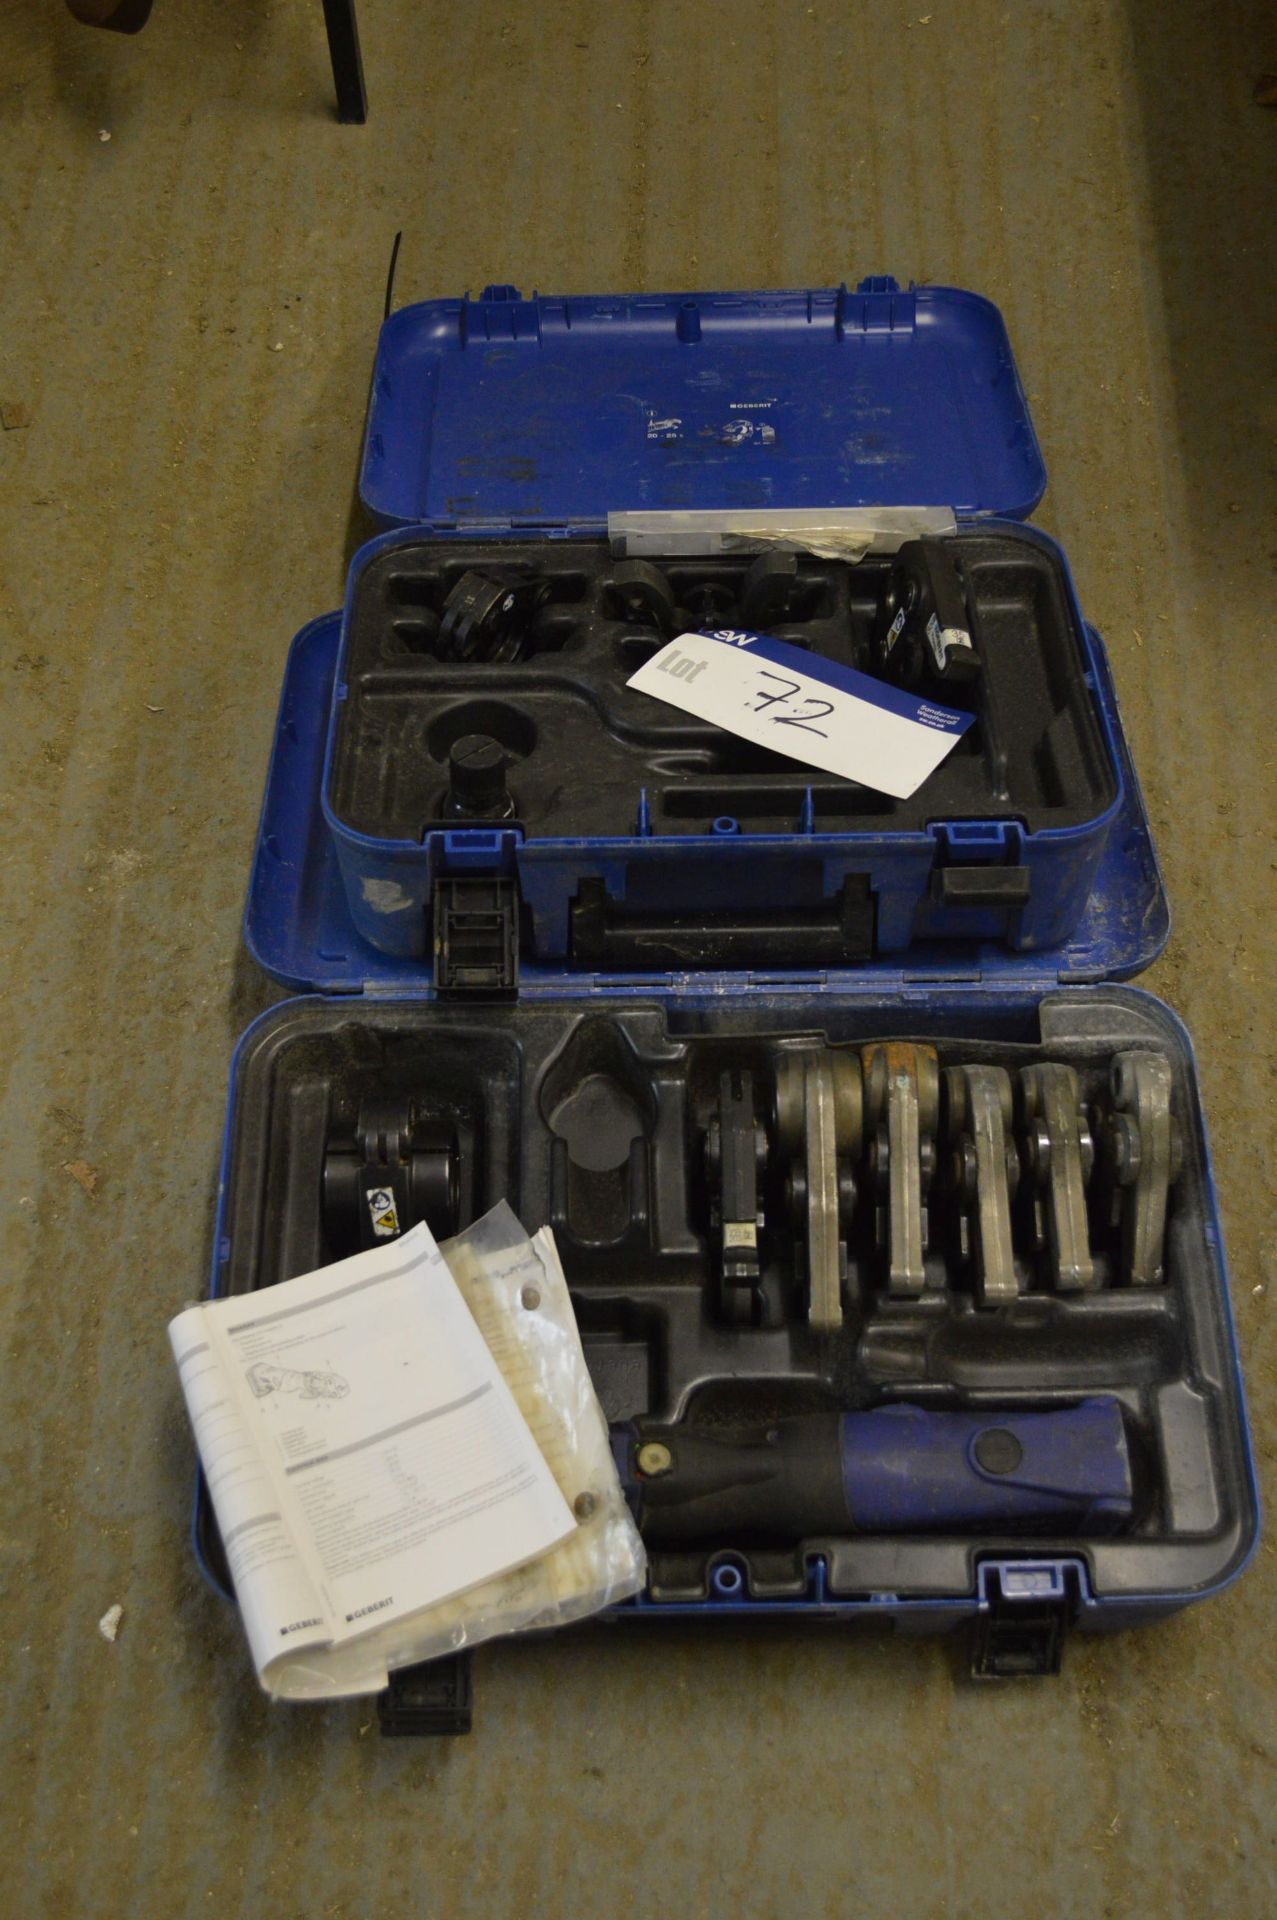 Geberit Pressing Tool Equipment, in two boxes